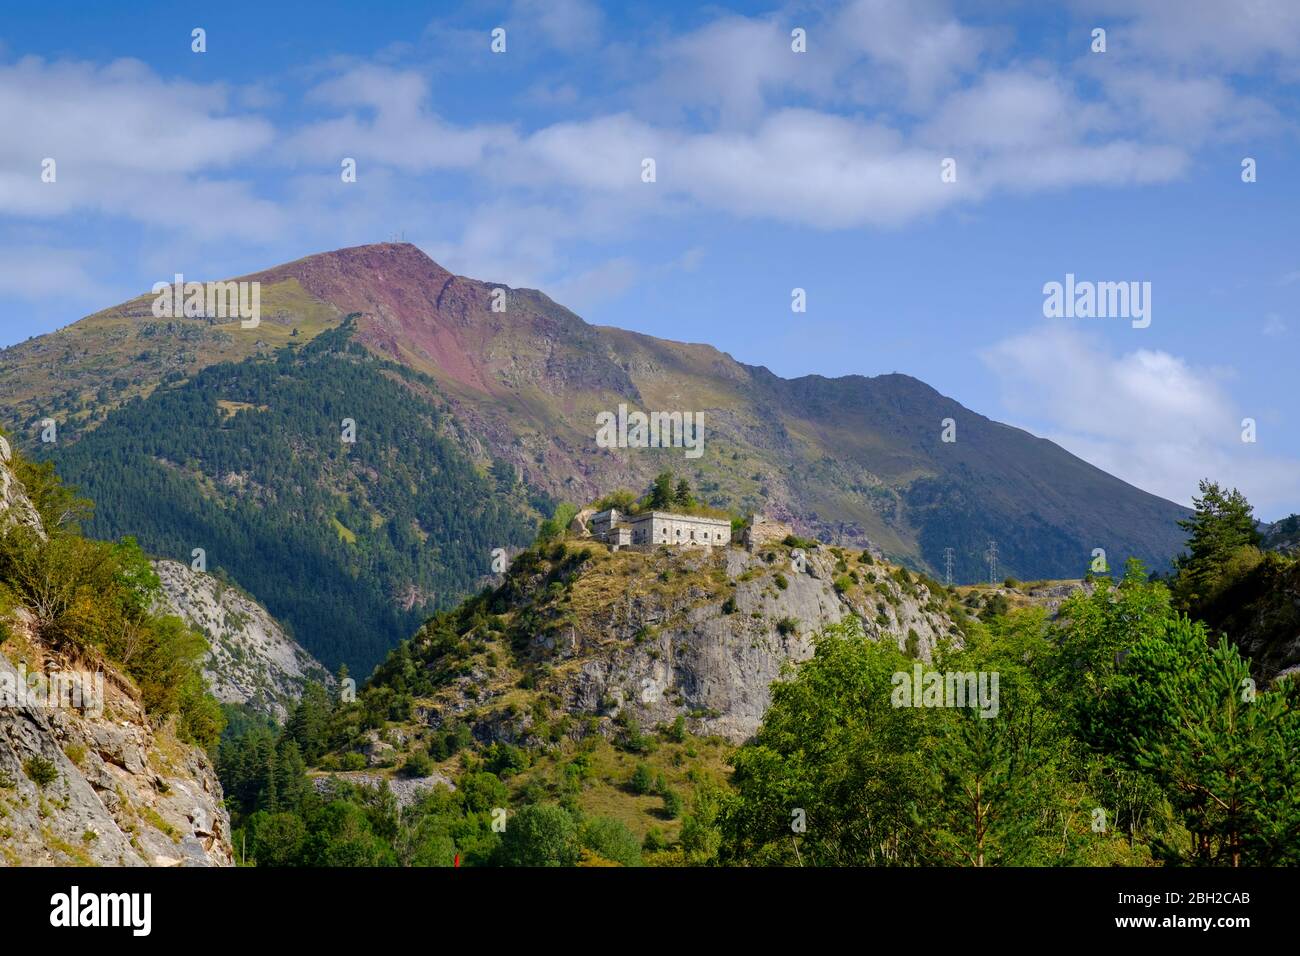 Spain, Province of Huesca, Canfranc, Scenic view of Fuerte de Coll de Ladrones and surrounding mountains Stock Photo